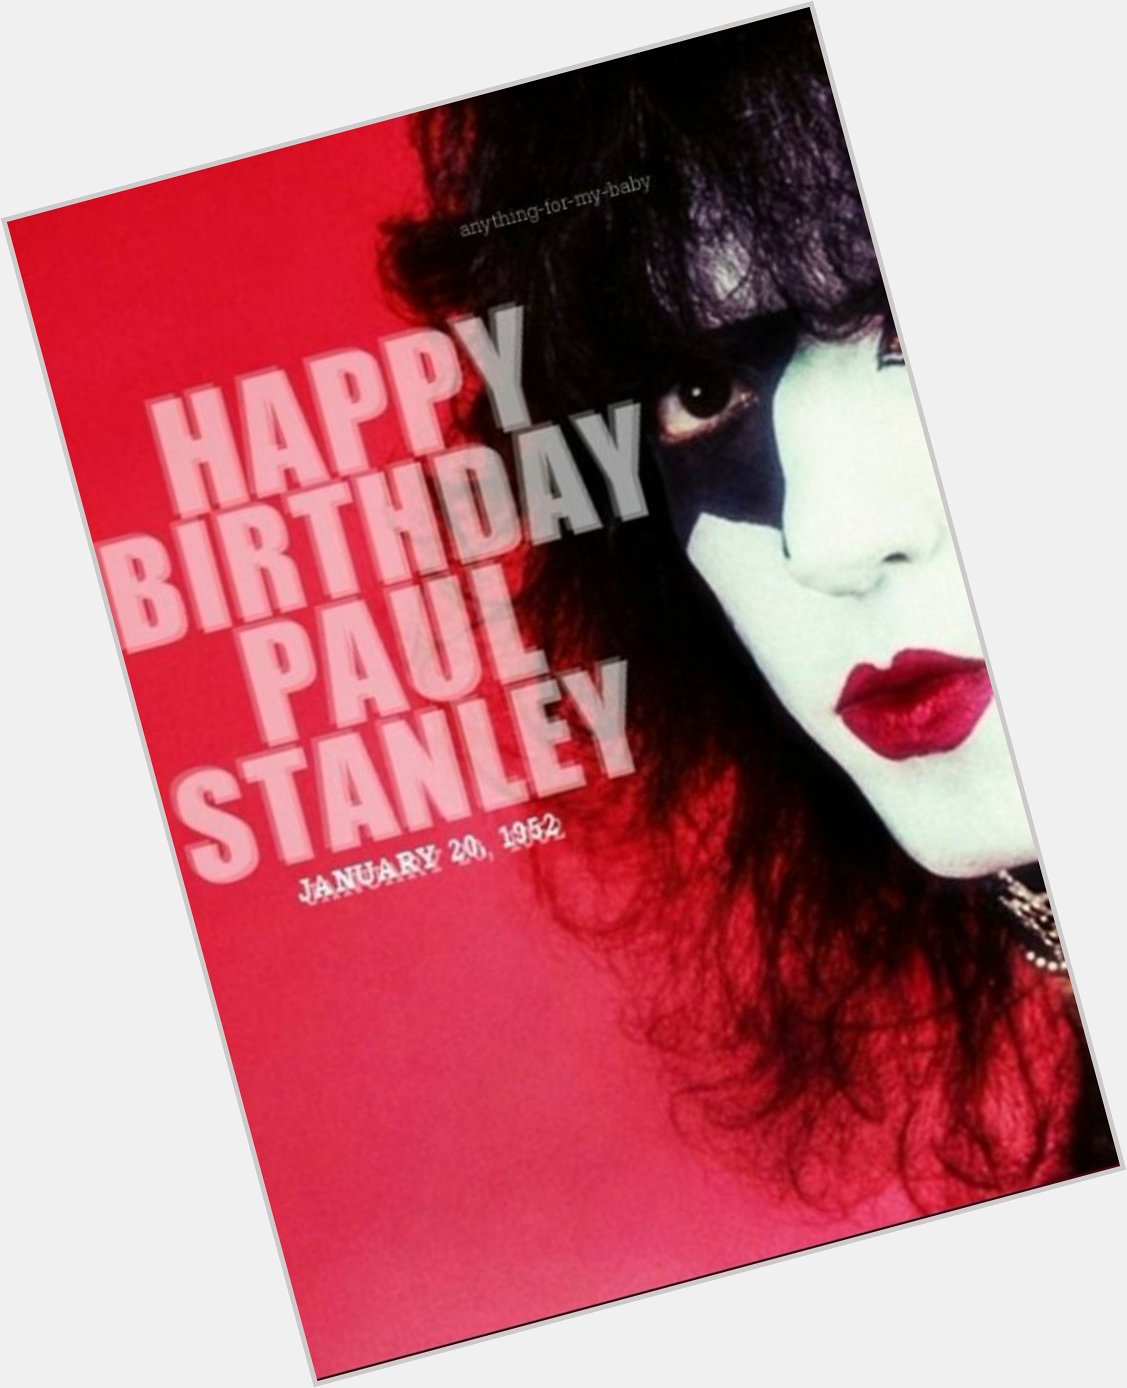   Happy birthday PAUL STANLEY From Italy by RO     i LOVE YOU       